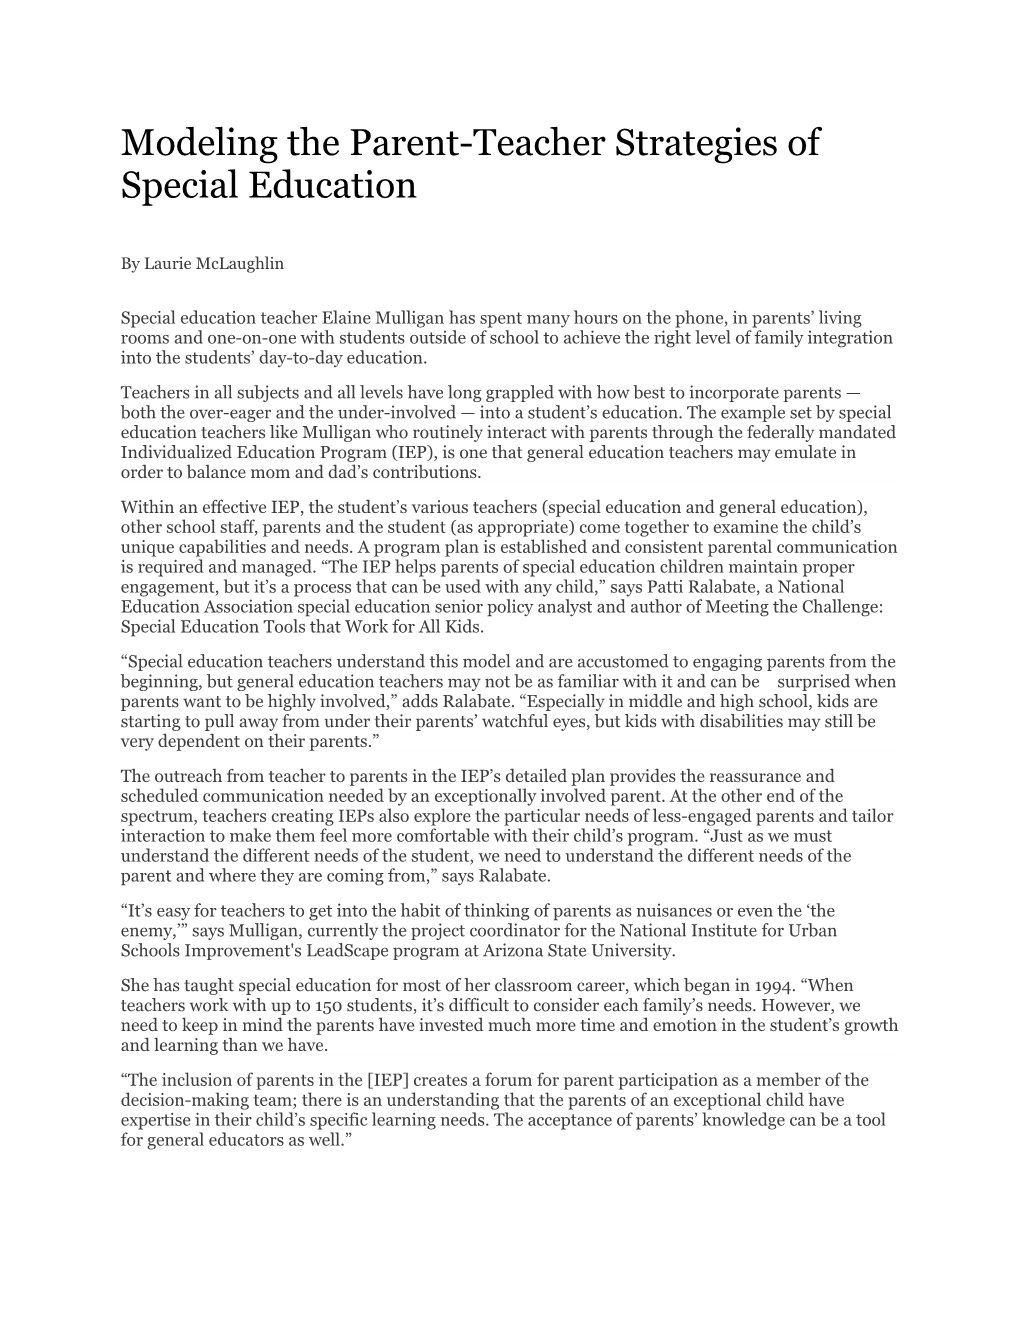 Modeling the Parent-Teacher Strategies of Special Education